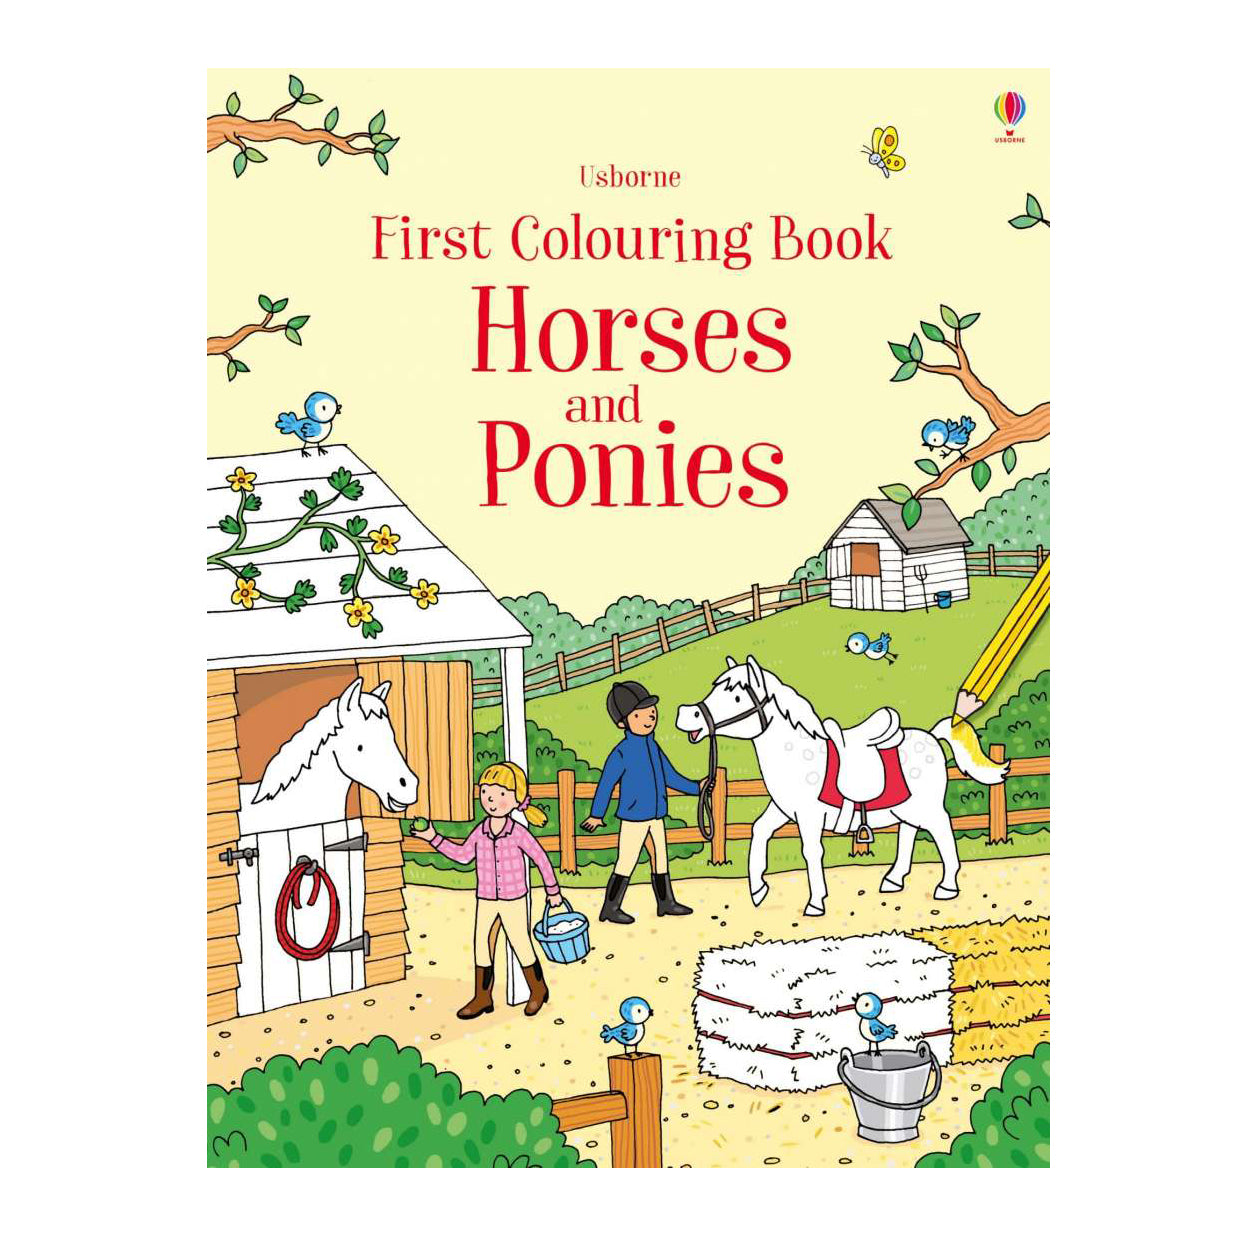 FIRST COLOURING BOOK HORSES AND PONIES